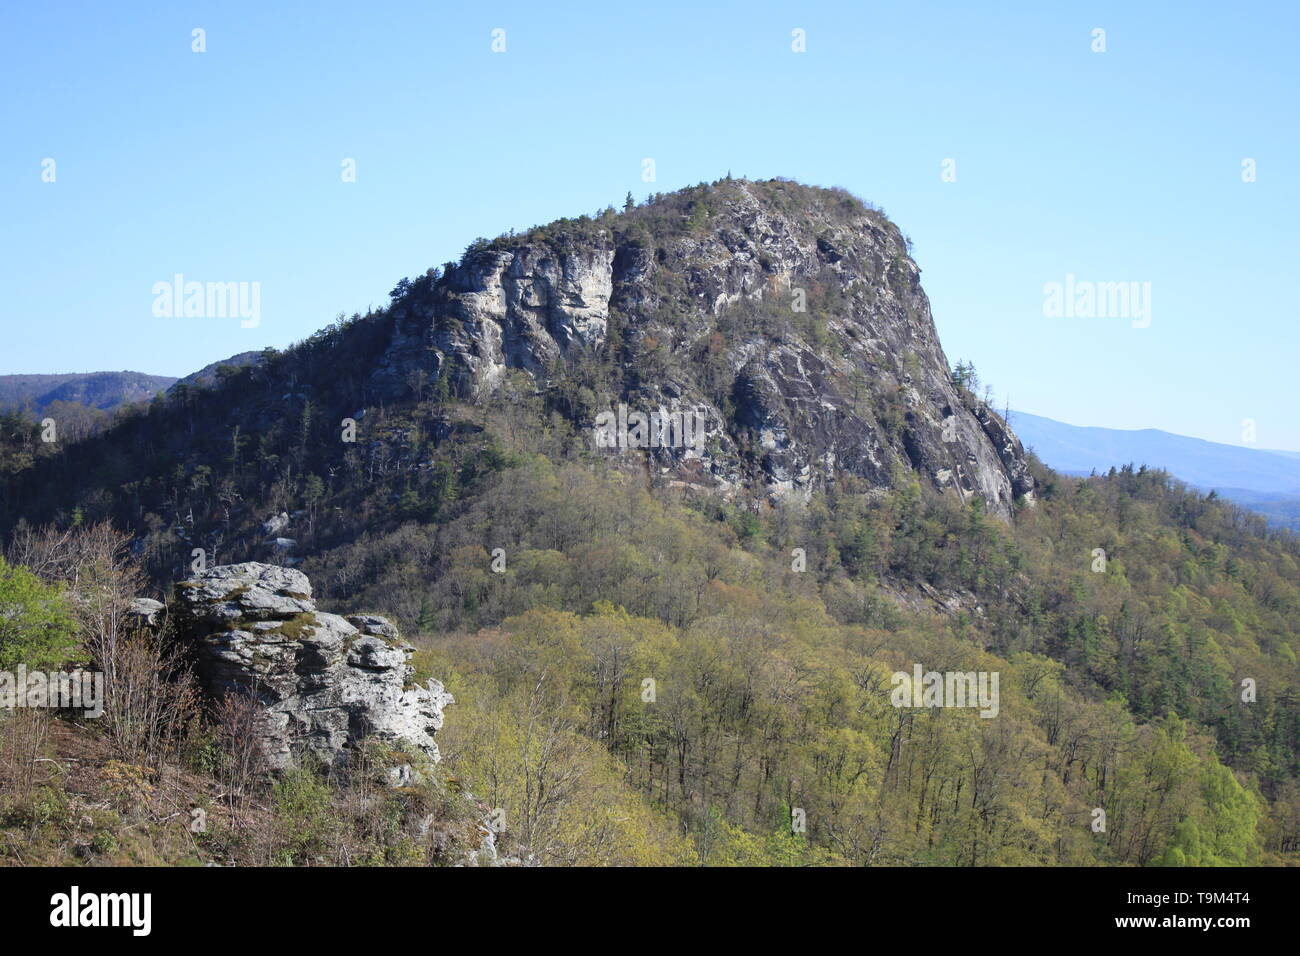 Tabelle Rock, Pisgah National Forest, NC Stockfoto